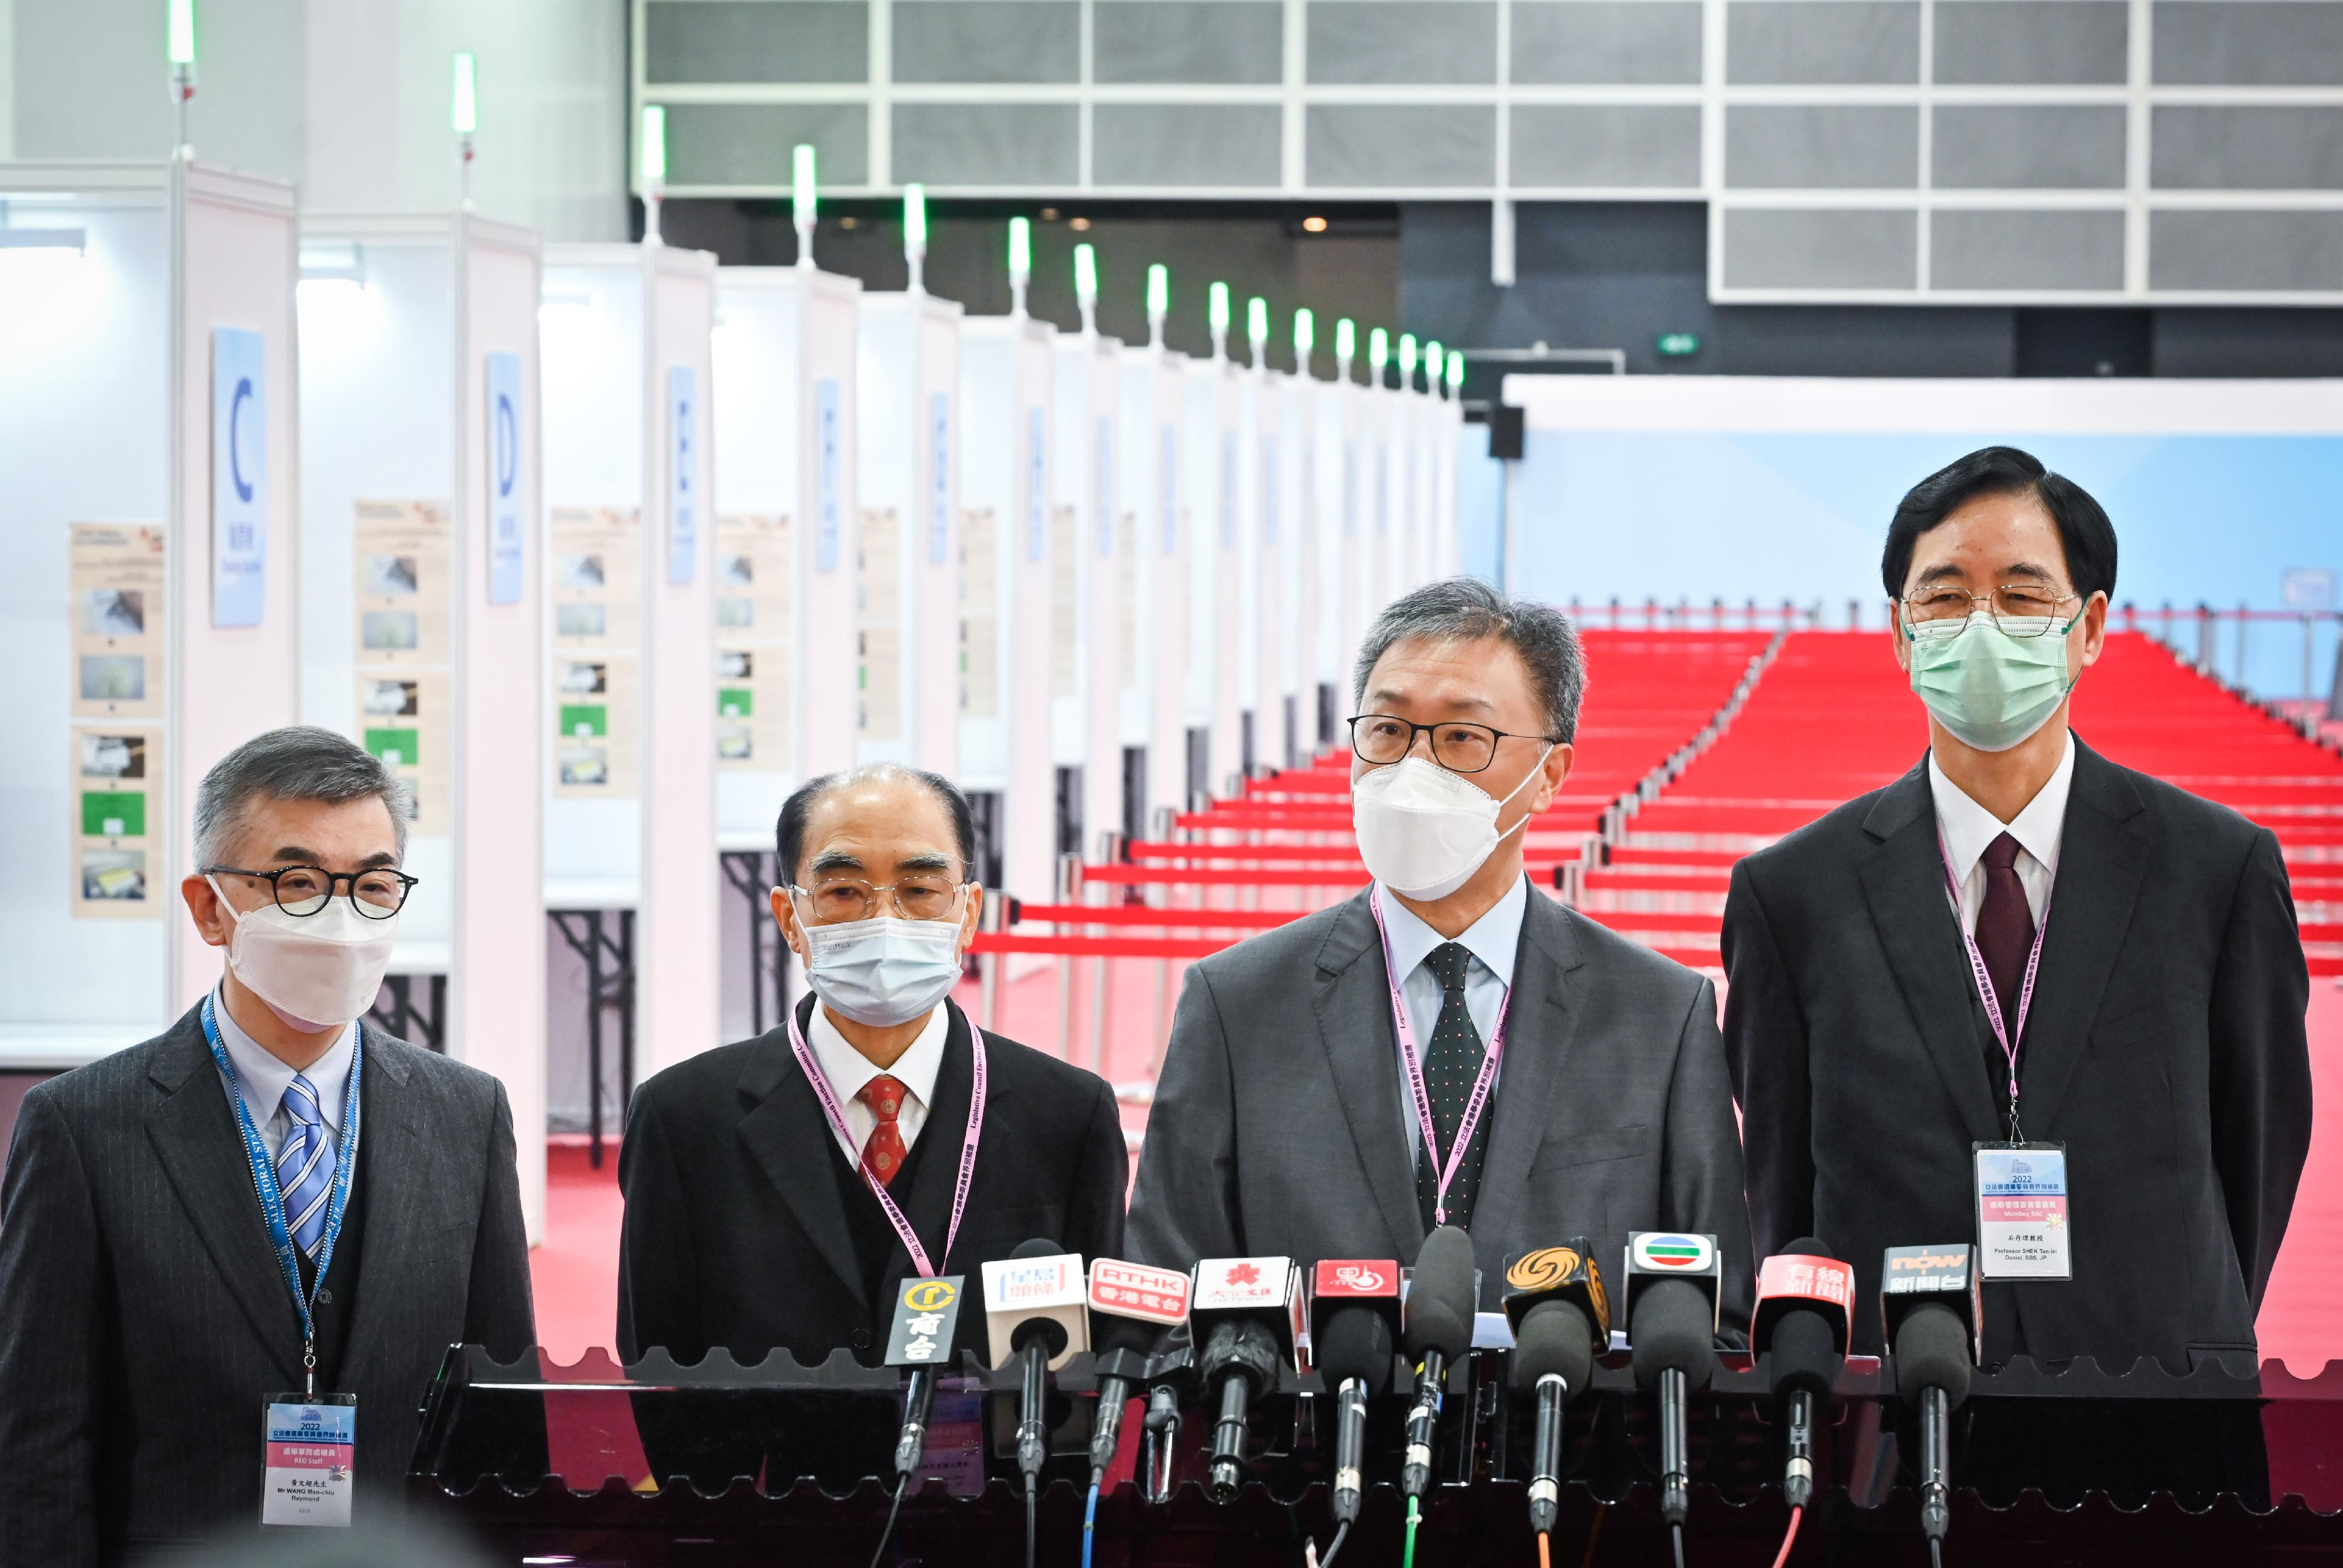 The Chairman of the Electoral Affairs Commission (EAC), Mr Justice David Lok (second right); EAC members Mr Arthur Luk, SC (second left), and Professor Daniel Shek (first right) met the media after visiting the polling station and central counting station of the 2022 Legislative Council Election Committee constituency by-election at the Hong Kong Convention and Exhibition Centre today (December 17). Also present was the Chief Electoral Officer of the Registration and Electoral Office, Mr Raymond Wang (first left).